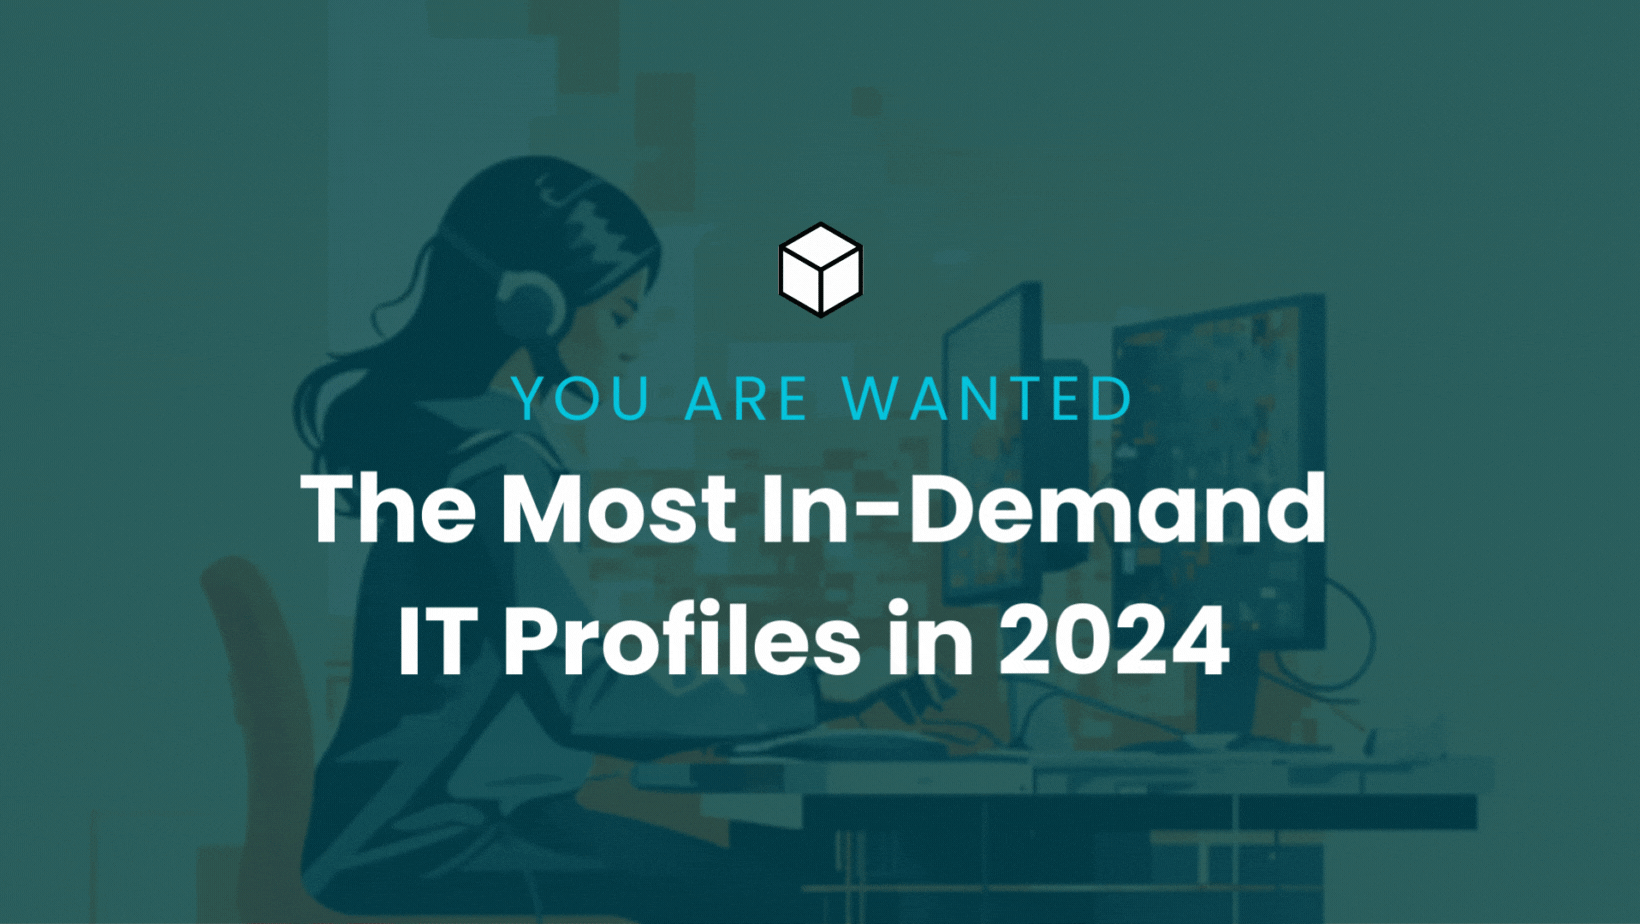 The Most In-Demand IT Profiles of 2024 